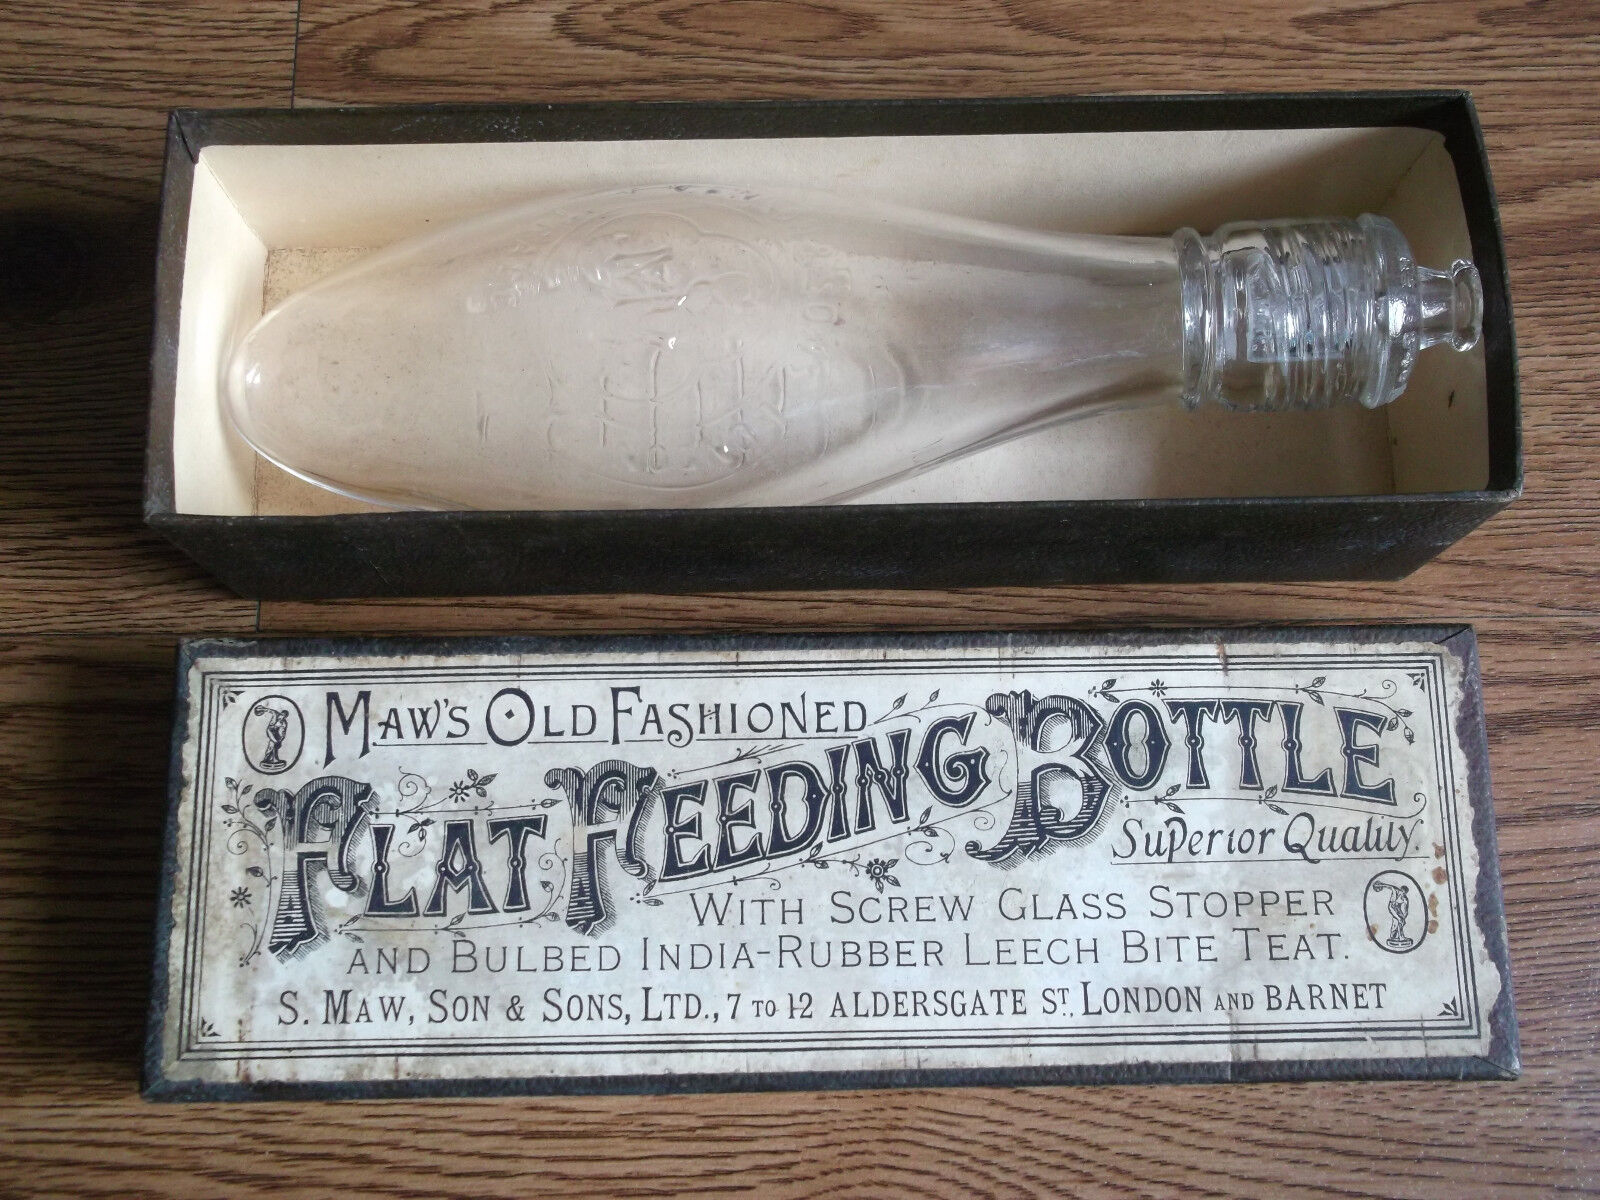 Rare vintage MAW'S old fashioned flat feeding bottle of 40's London and Barnet.